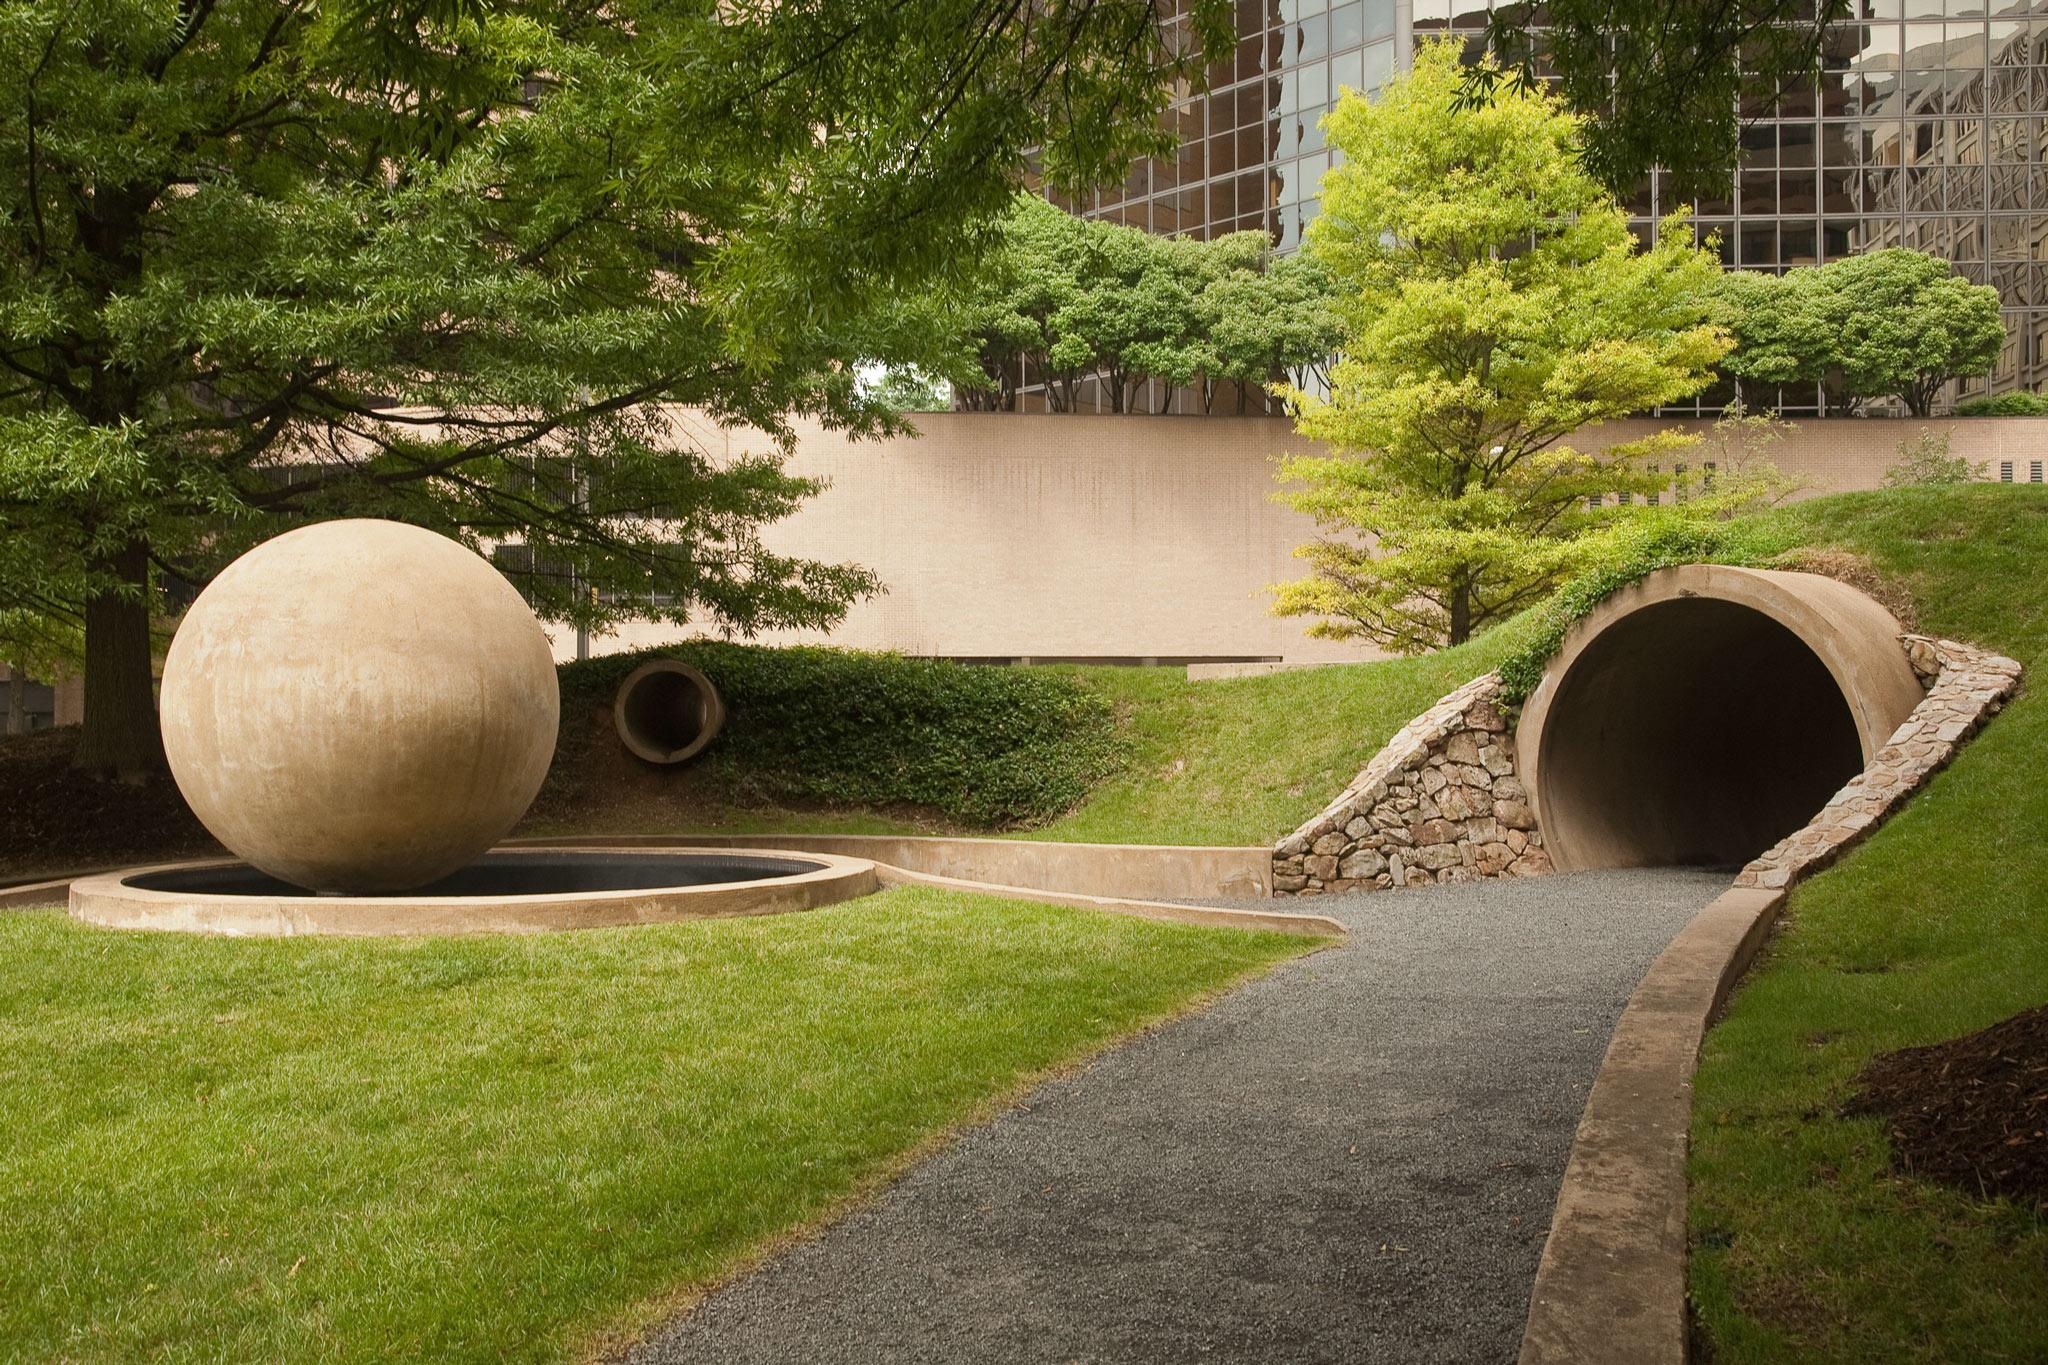 a large concrete sphere and a circular tunnel in a grassy park surrounded by trees and buildings